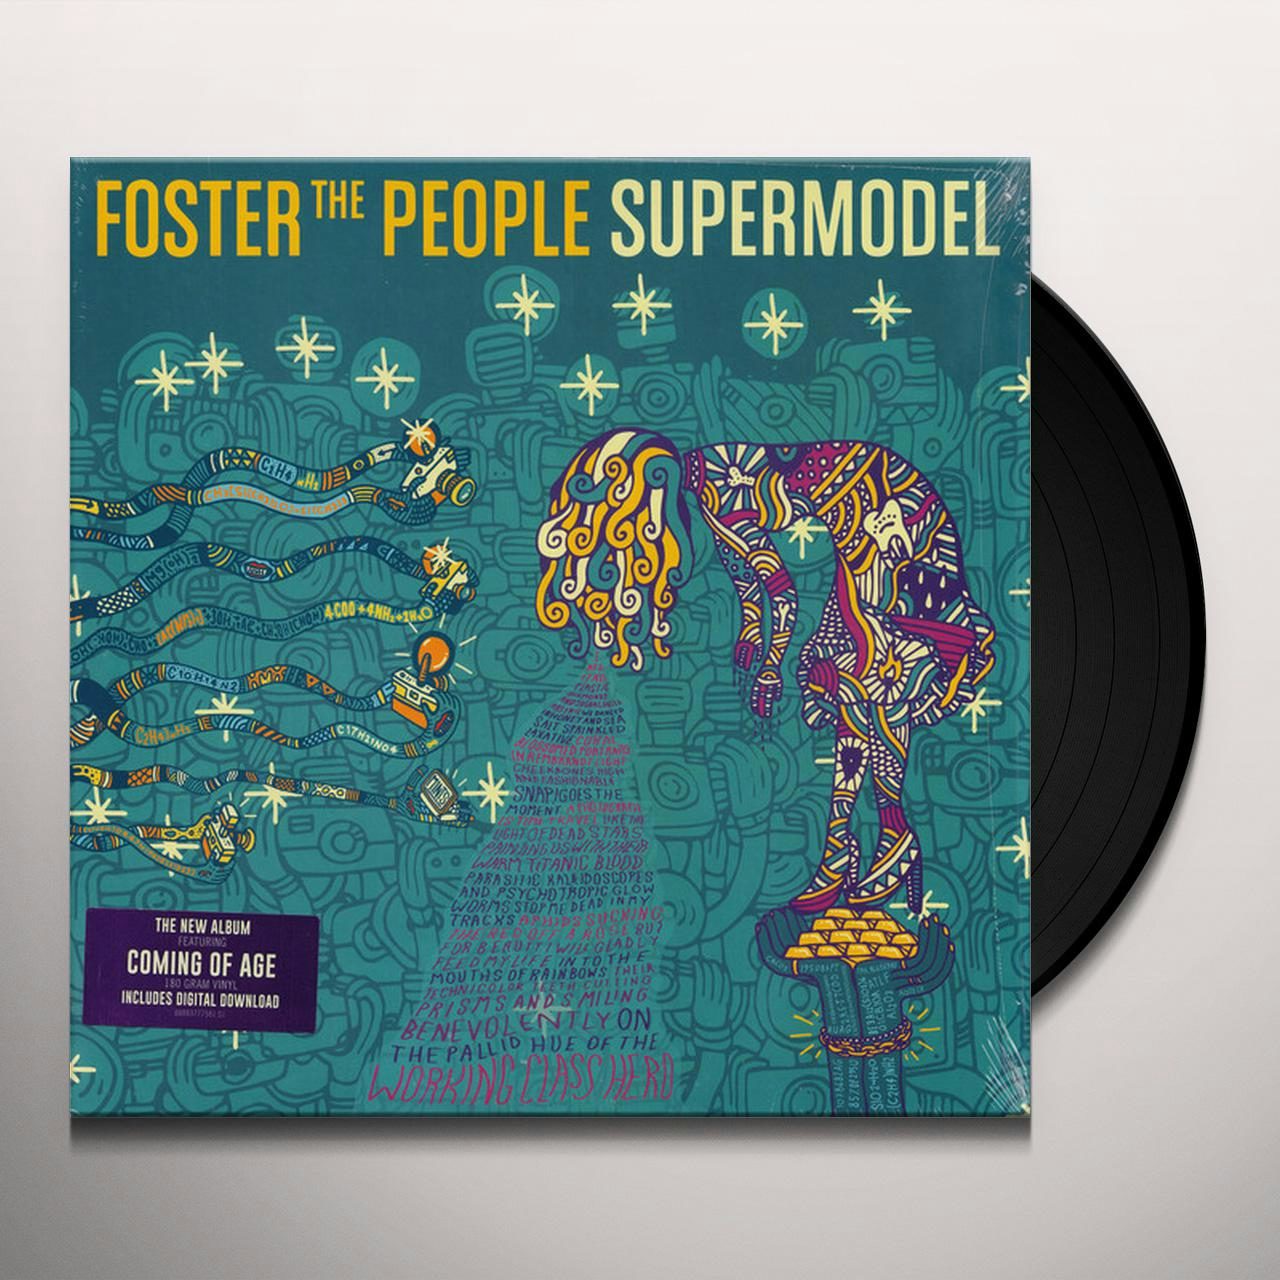 Foster The People Supermodel Vinyl Record $25.49$22.99